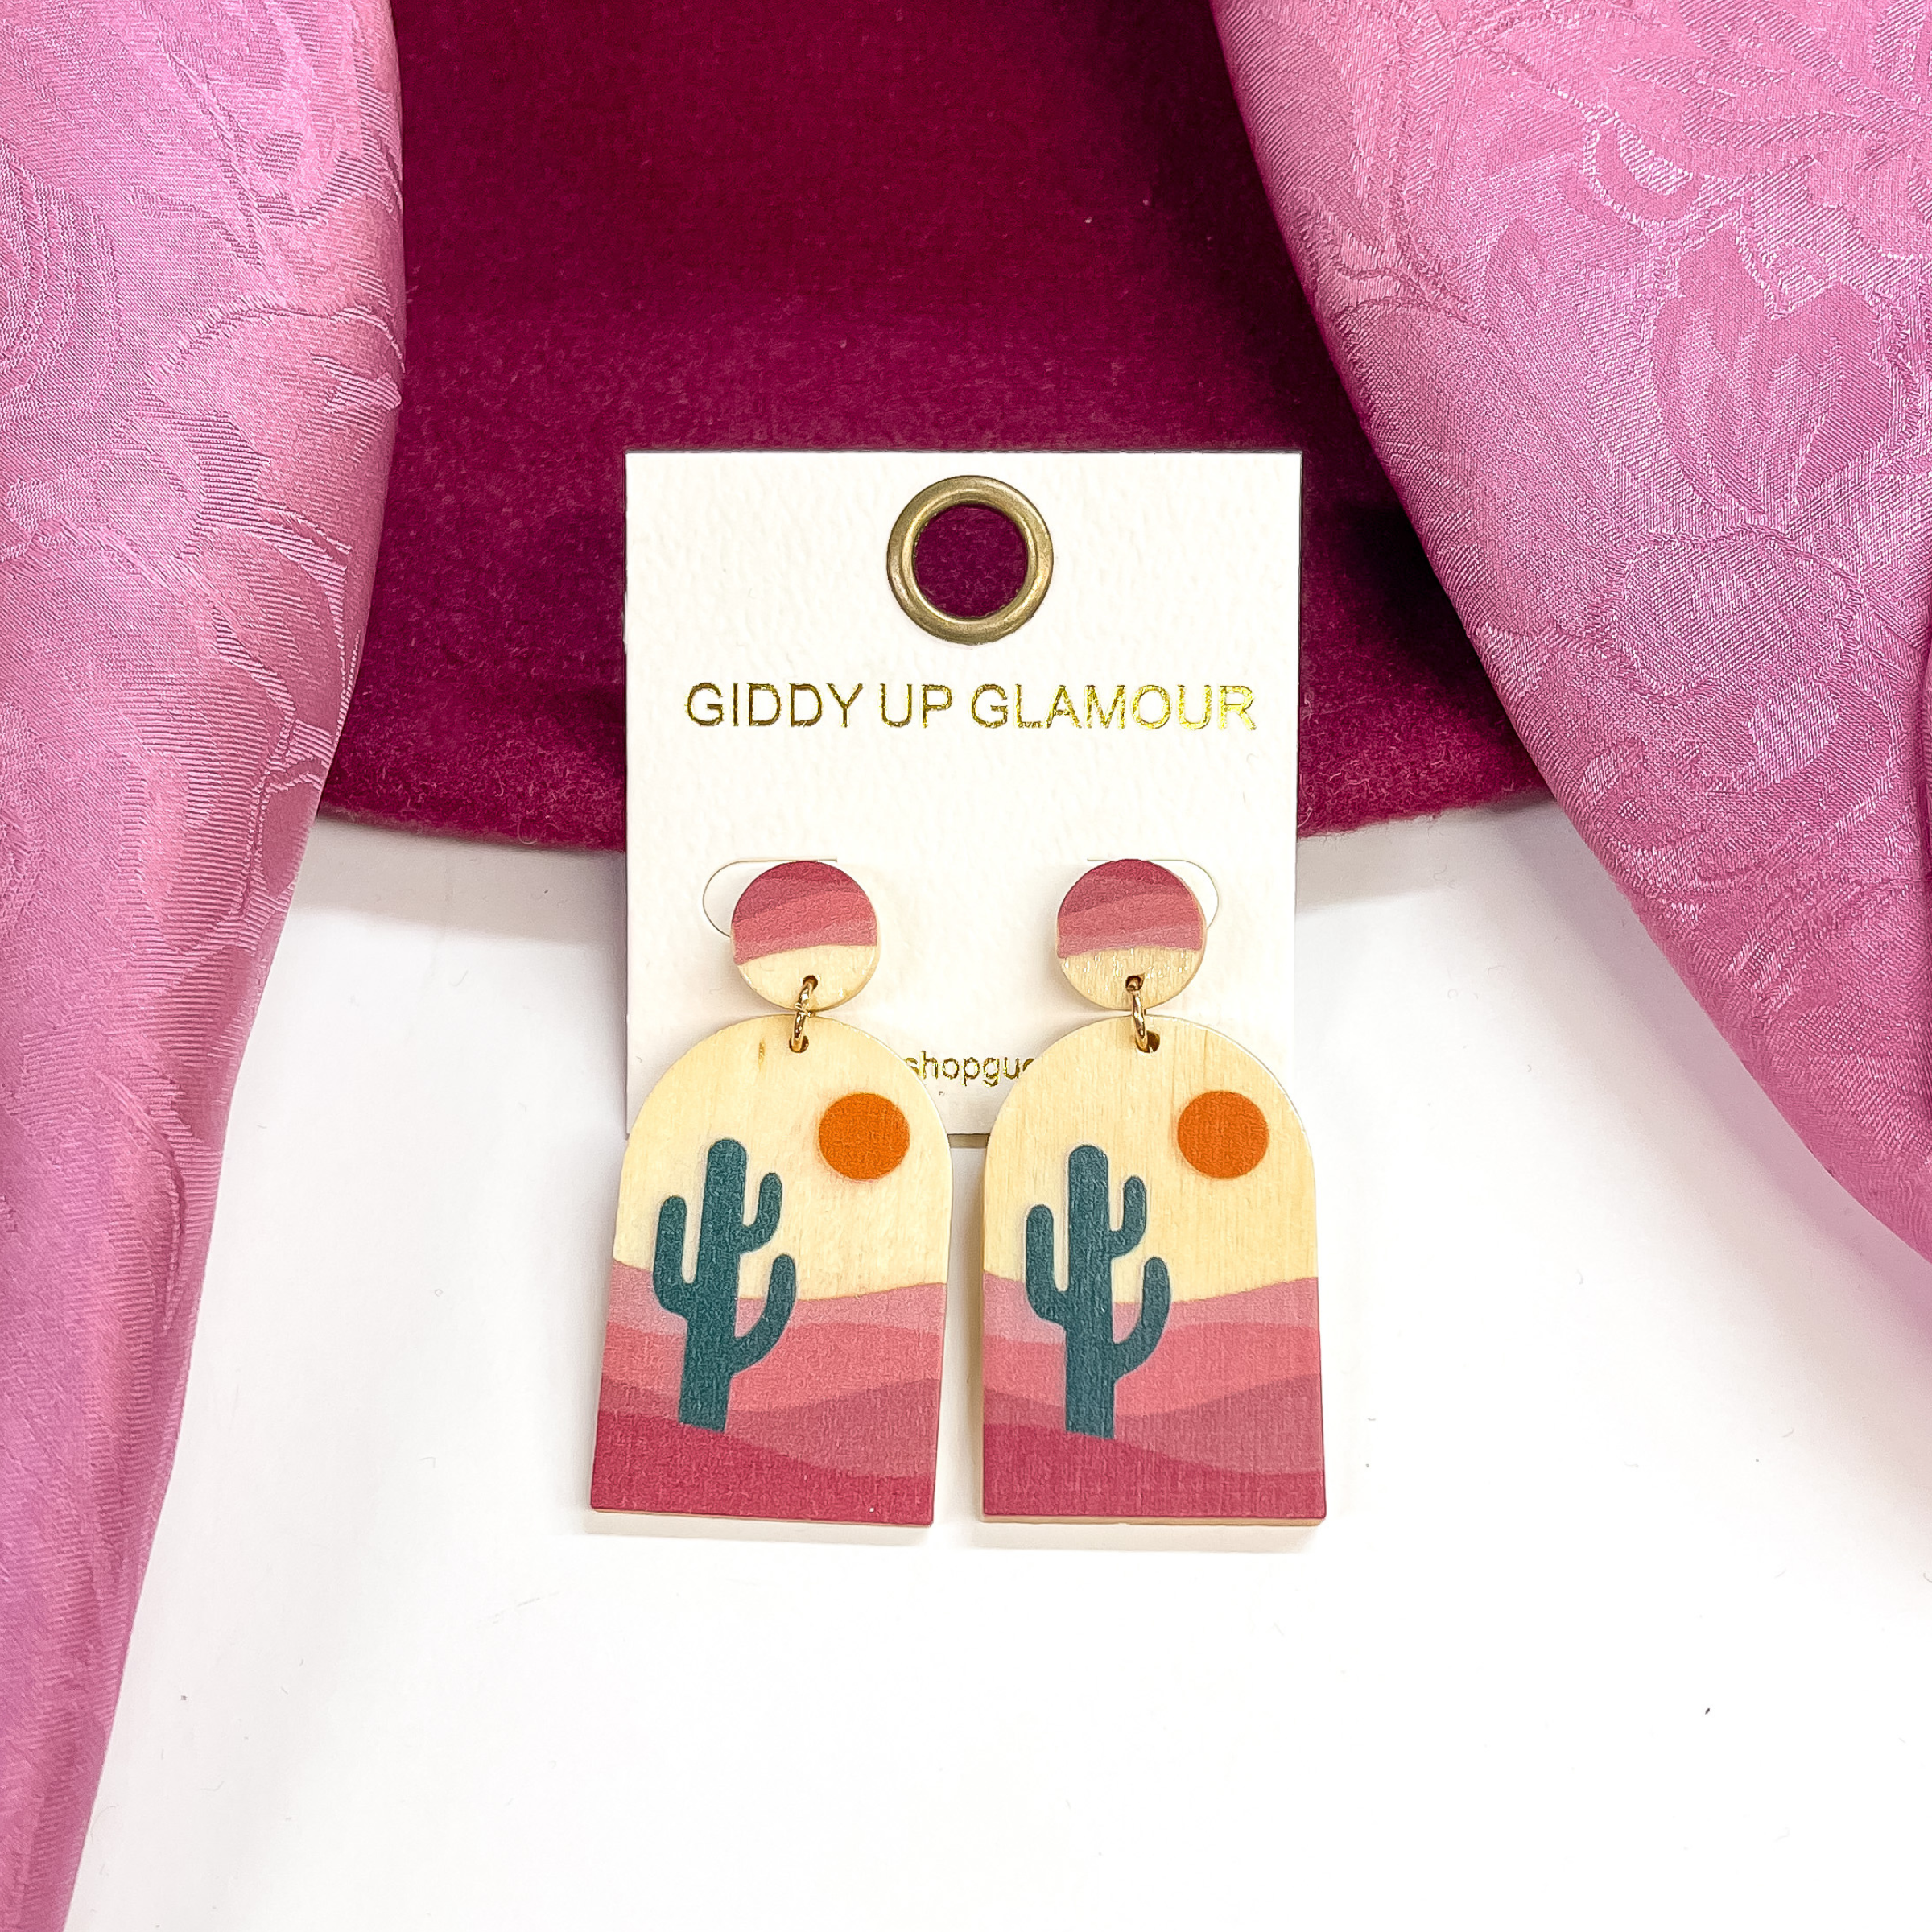 These are wood arch shape earrings with a circle  post back. These earrings has a dark green cactus  in a desert with pink mauve colors. These earrings  are taken on a burgundy hat brim and a white  background, with a light purple wild rag in the sides  as decor.